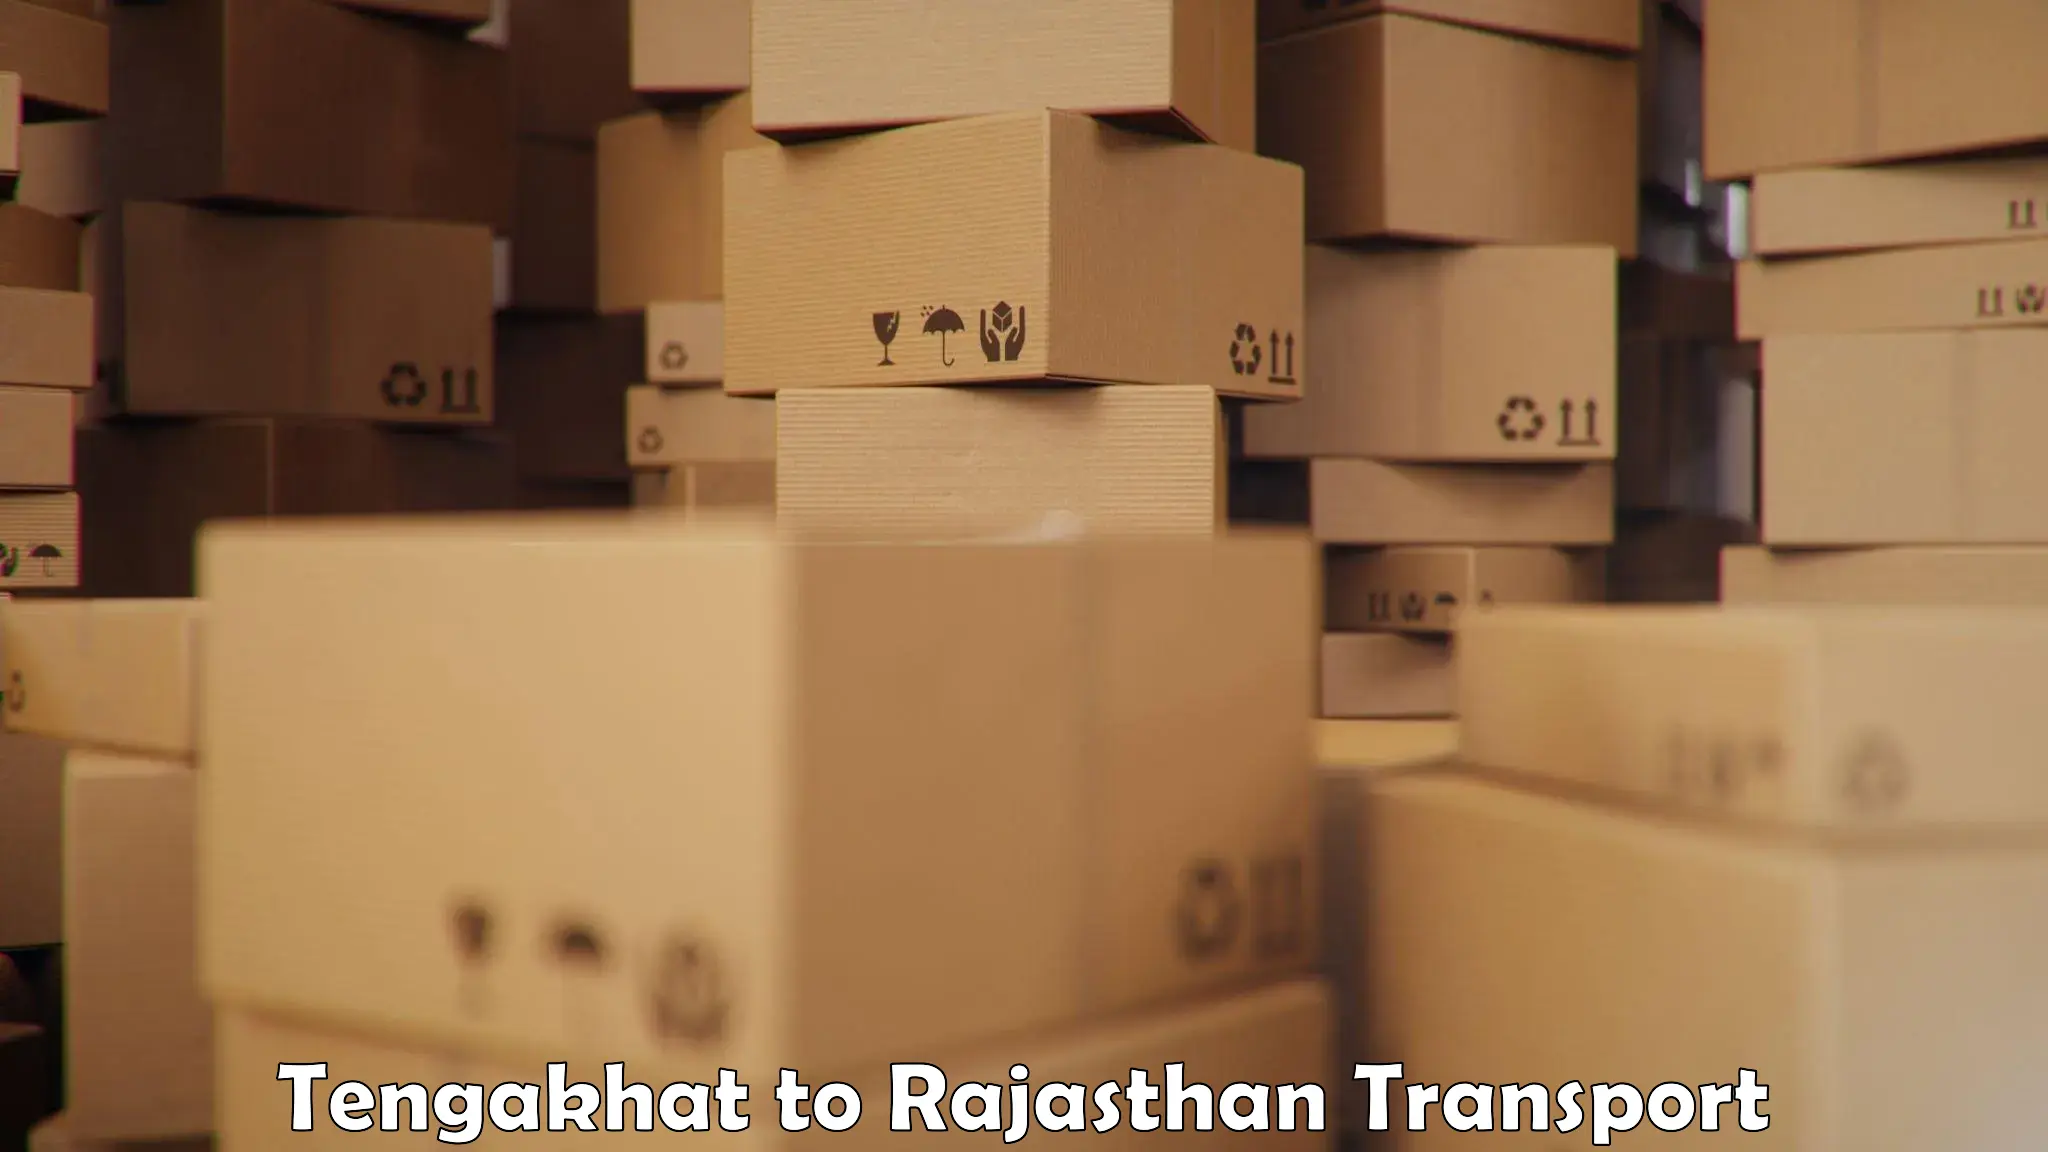 Truck transport companies in India Tengakhat to Rajasthan